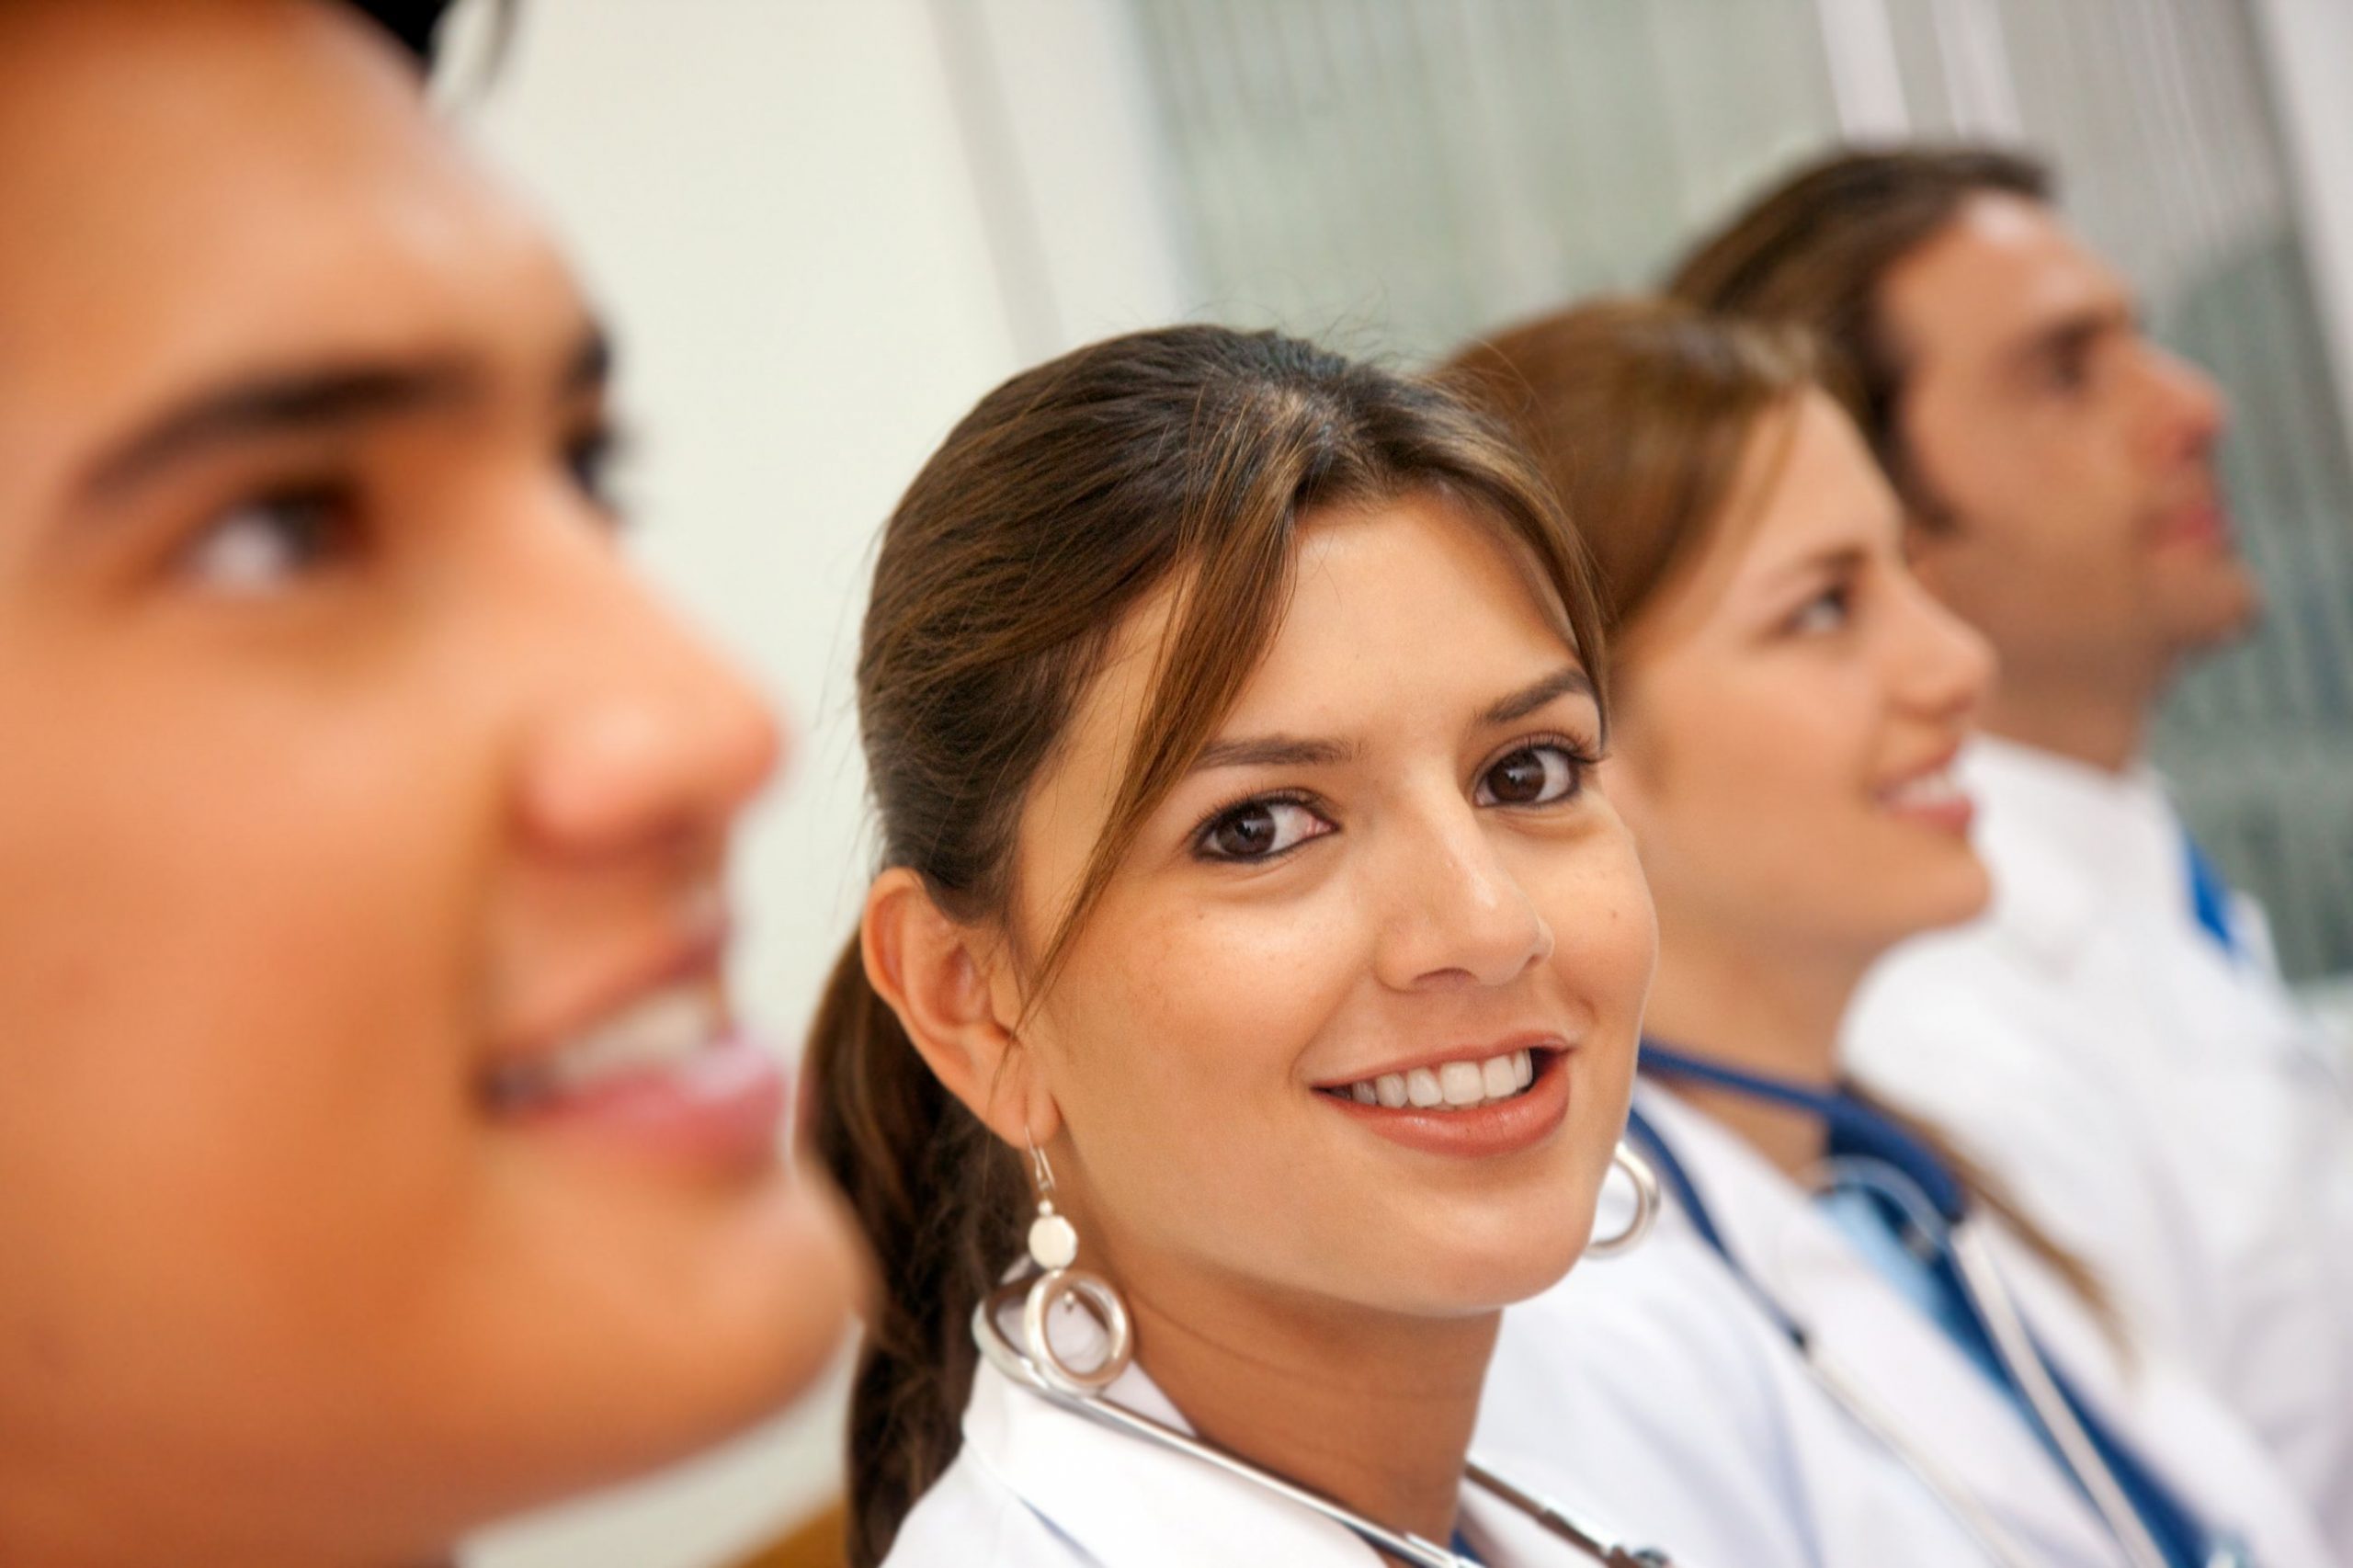 Top 5 websites that offer Free Continuing Education For Medical Assistants